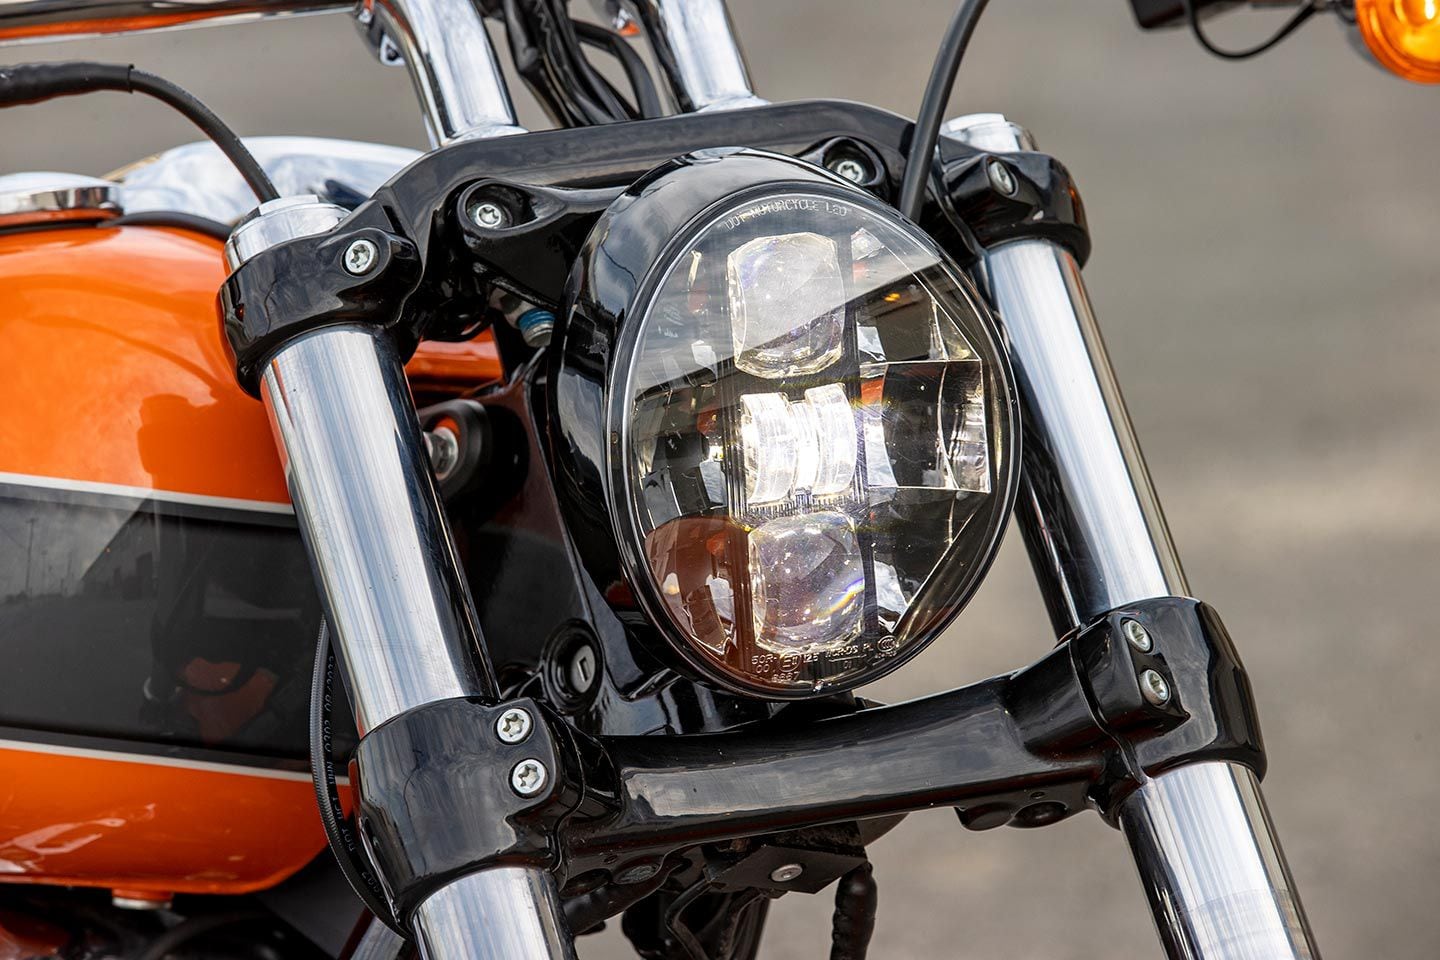 The headlight is an all LED unit.